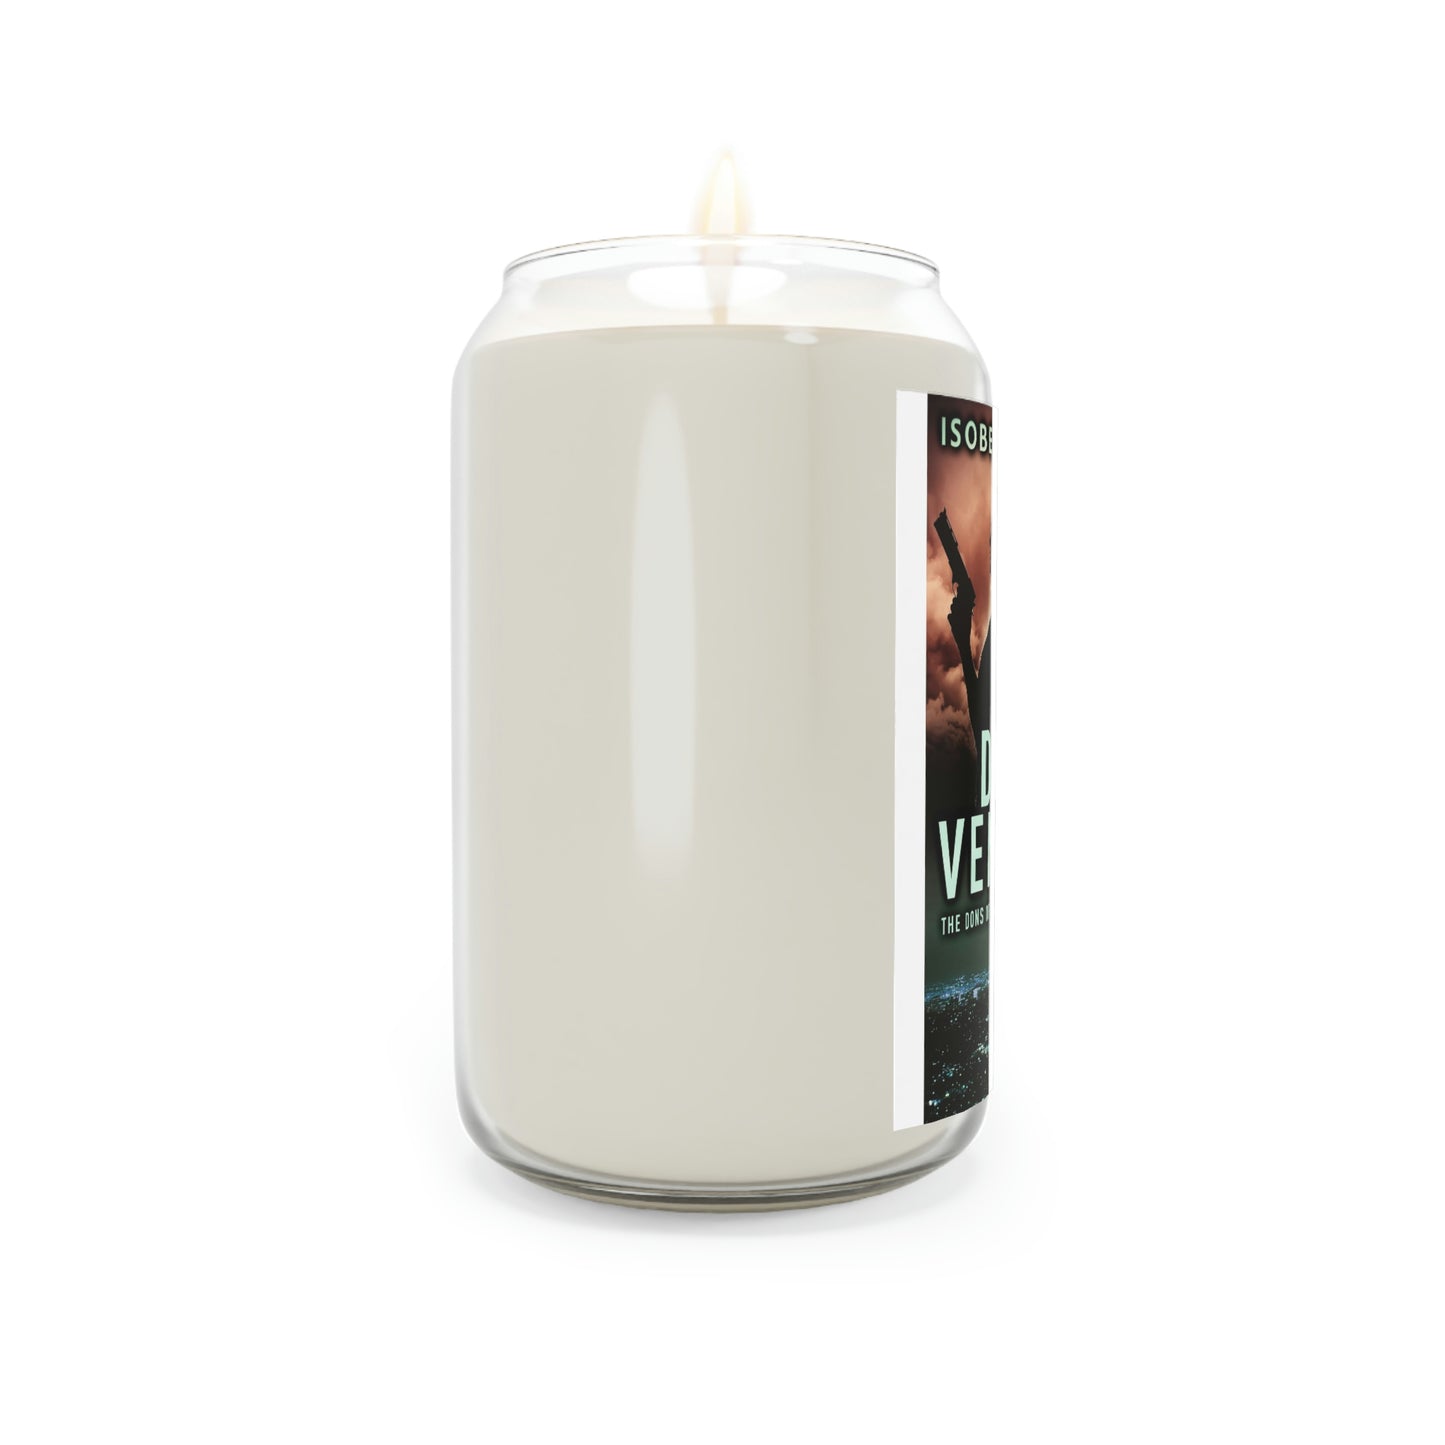 Don's Vendetta - Scented Candle